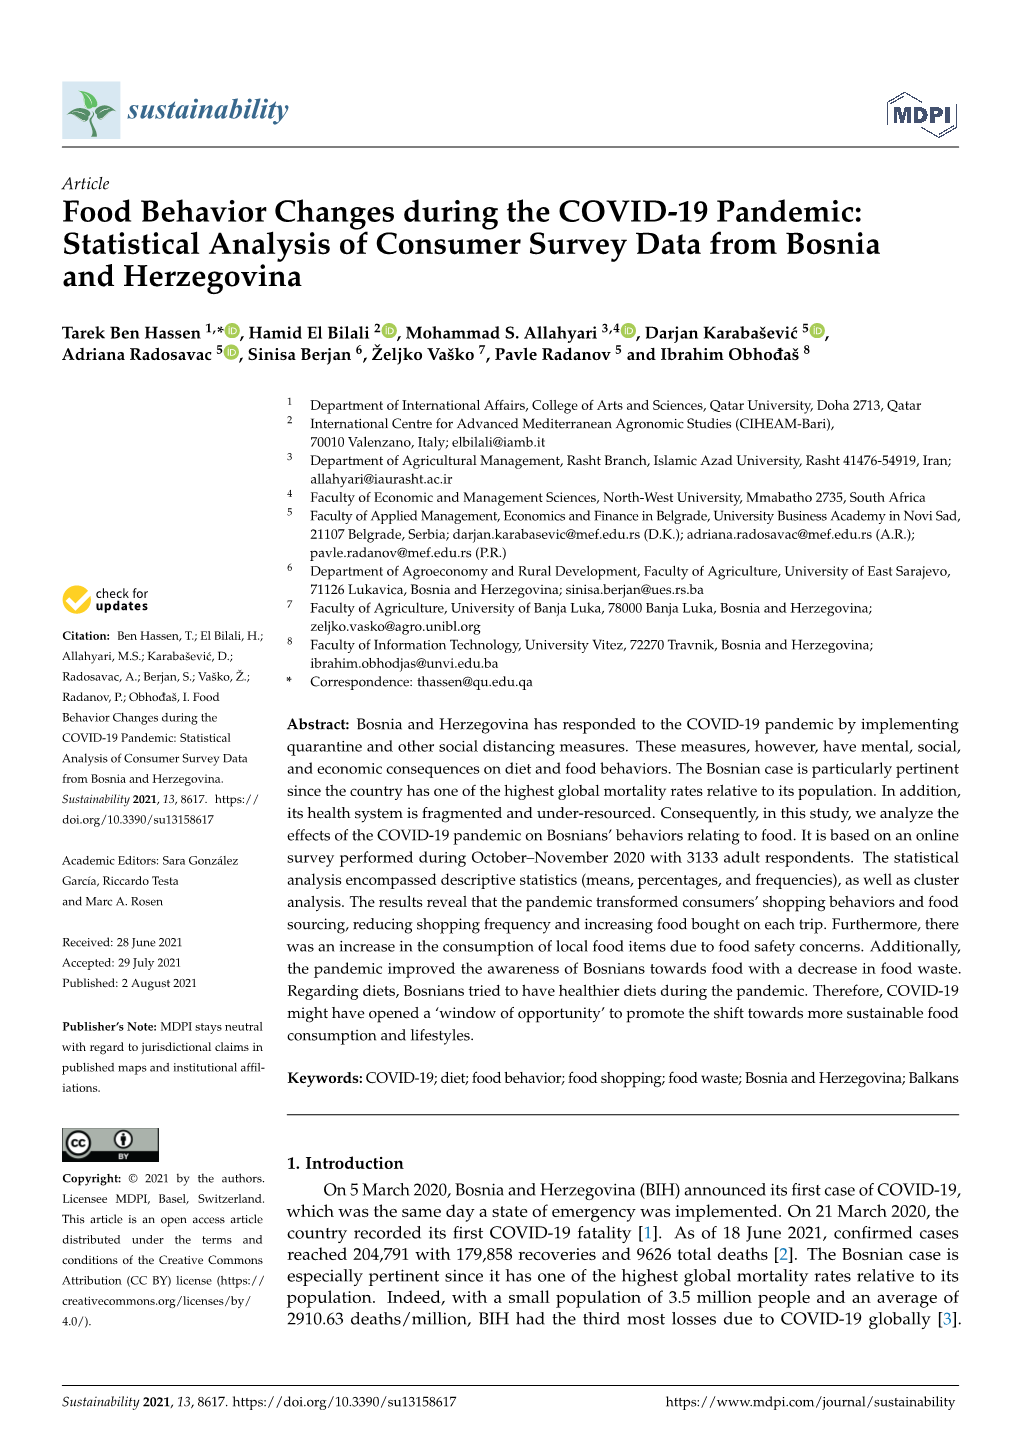 Food Behavior Changes During the COVID-19 Pandemic: Statistical Analysis of Consumer Survey Data from Bosnia and Herzegovina